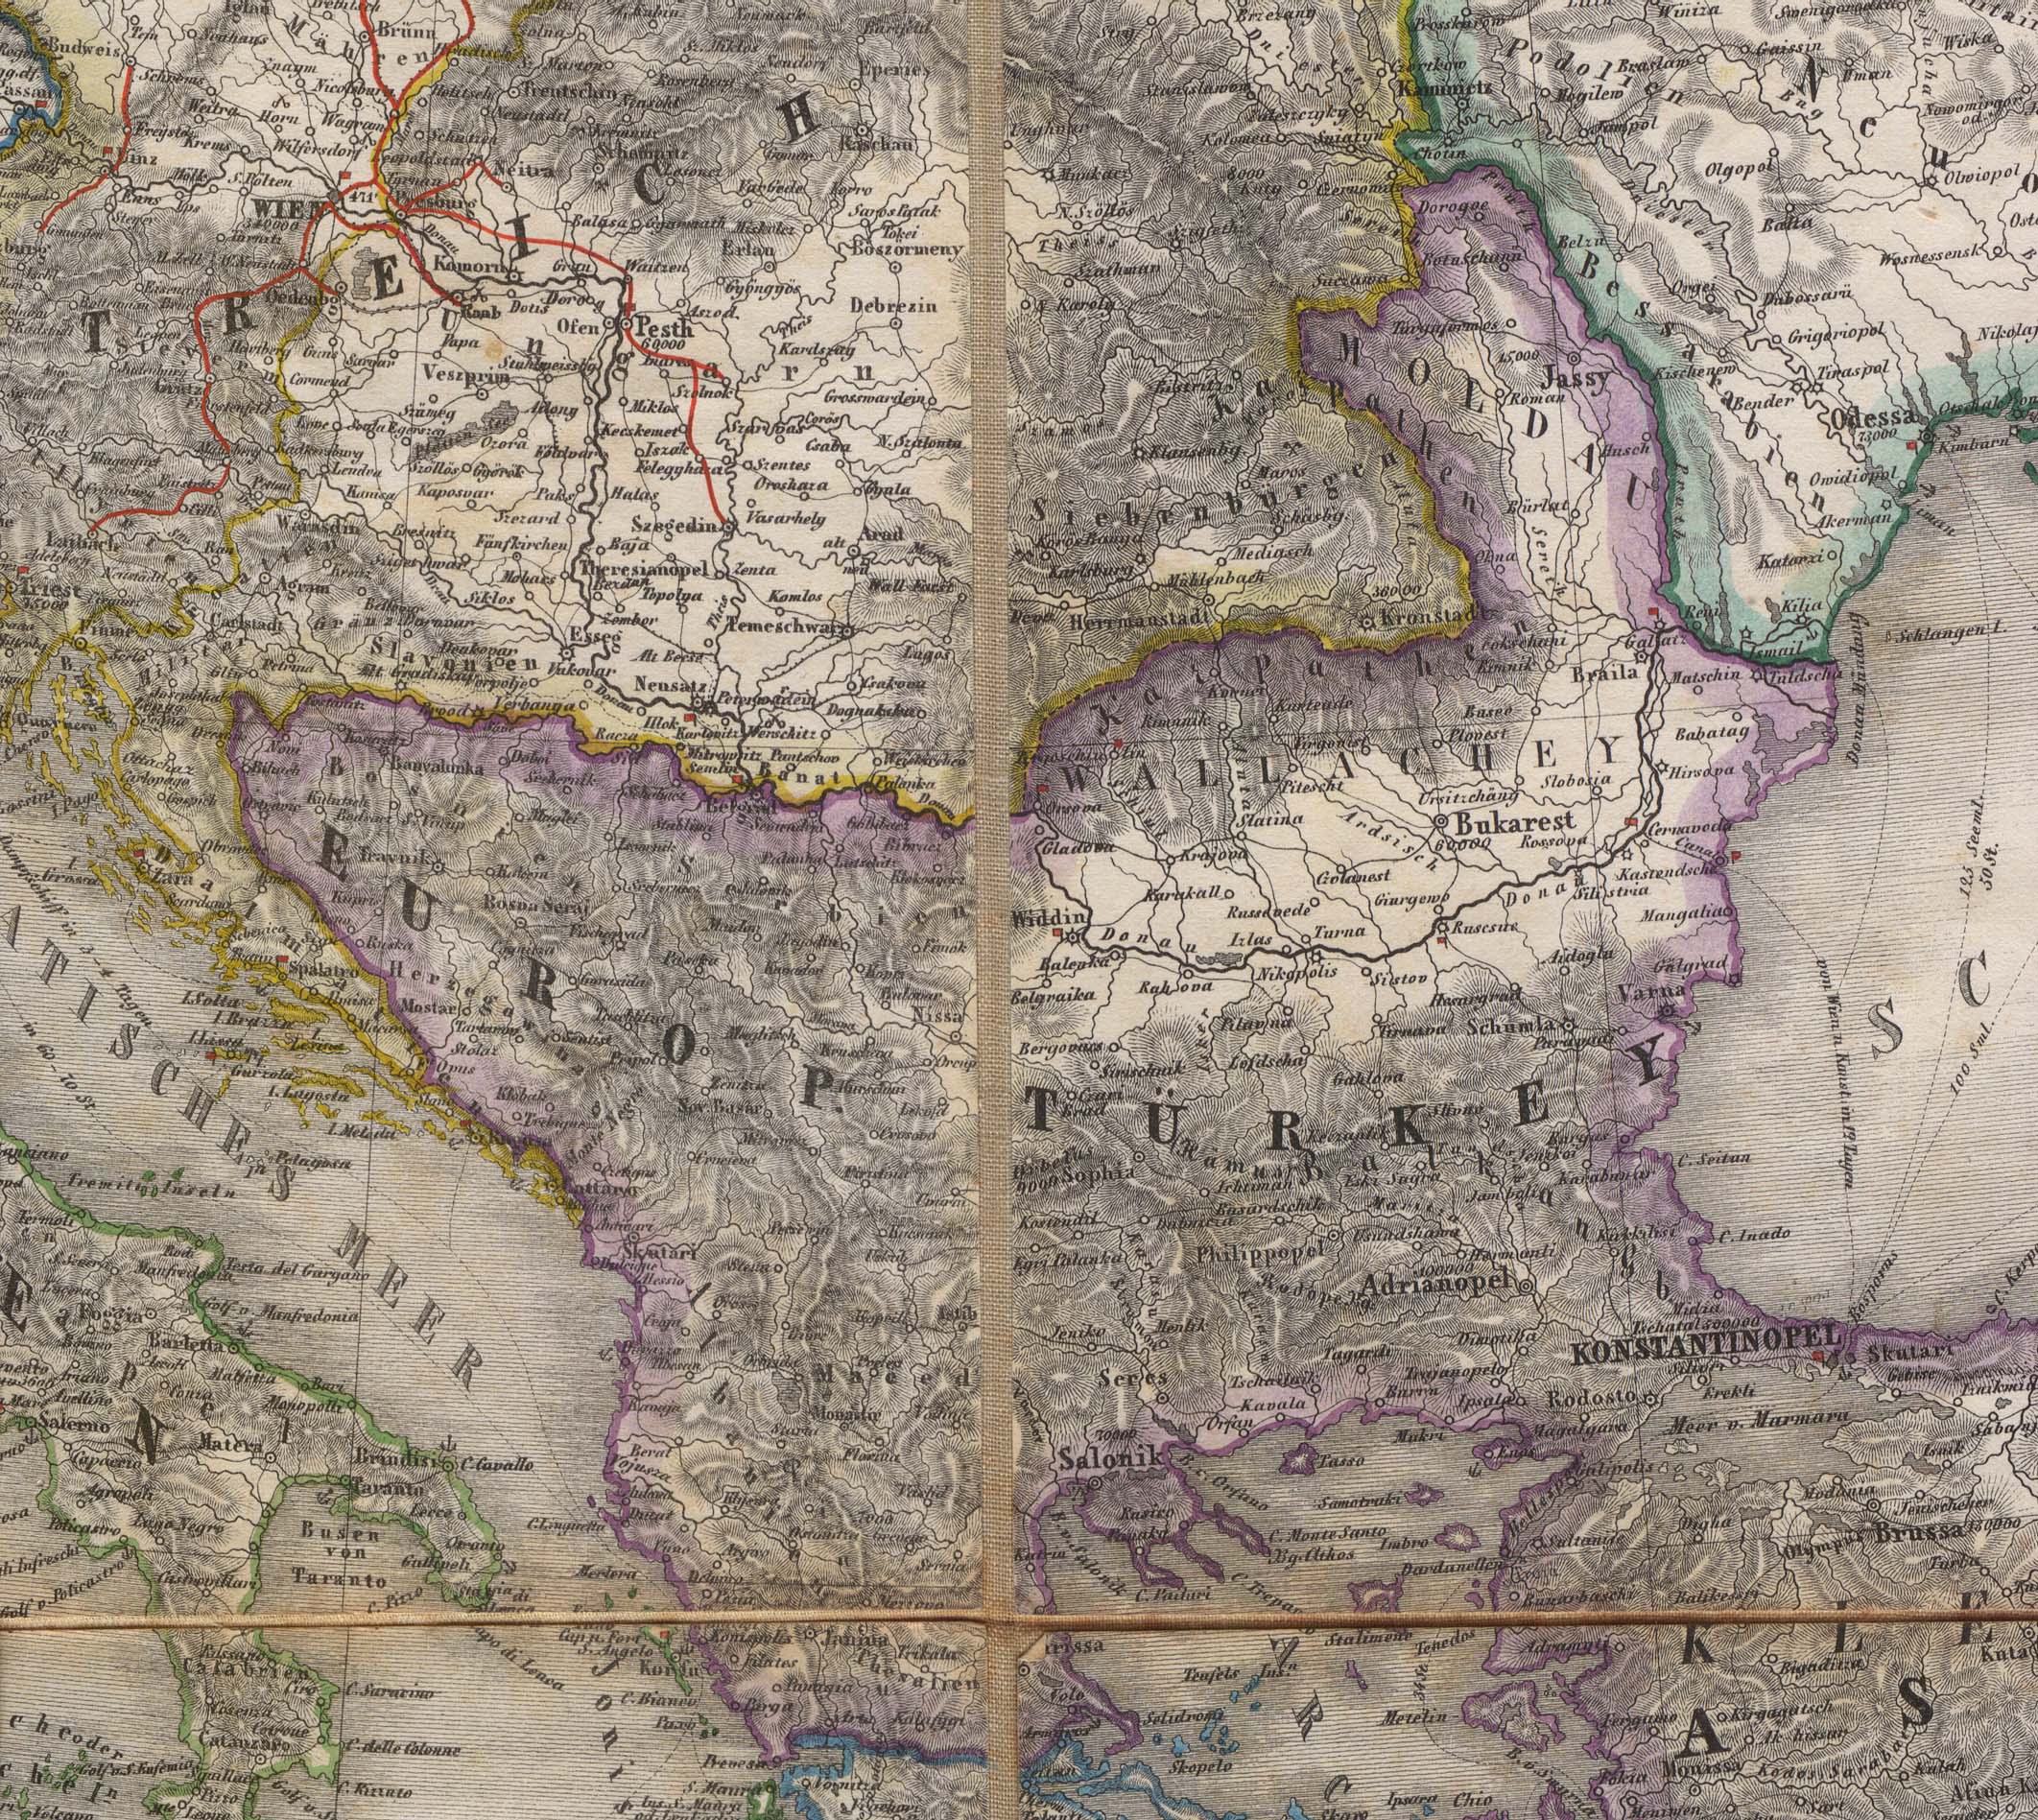 Portion of an 1856 map of Europe
 showing the Balkans, from the Perry-Castaneda Library Map
 Collection, University of Texas.